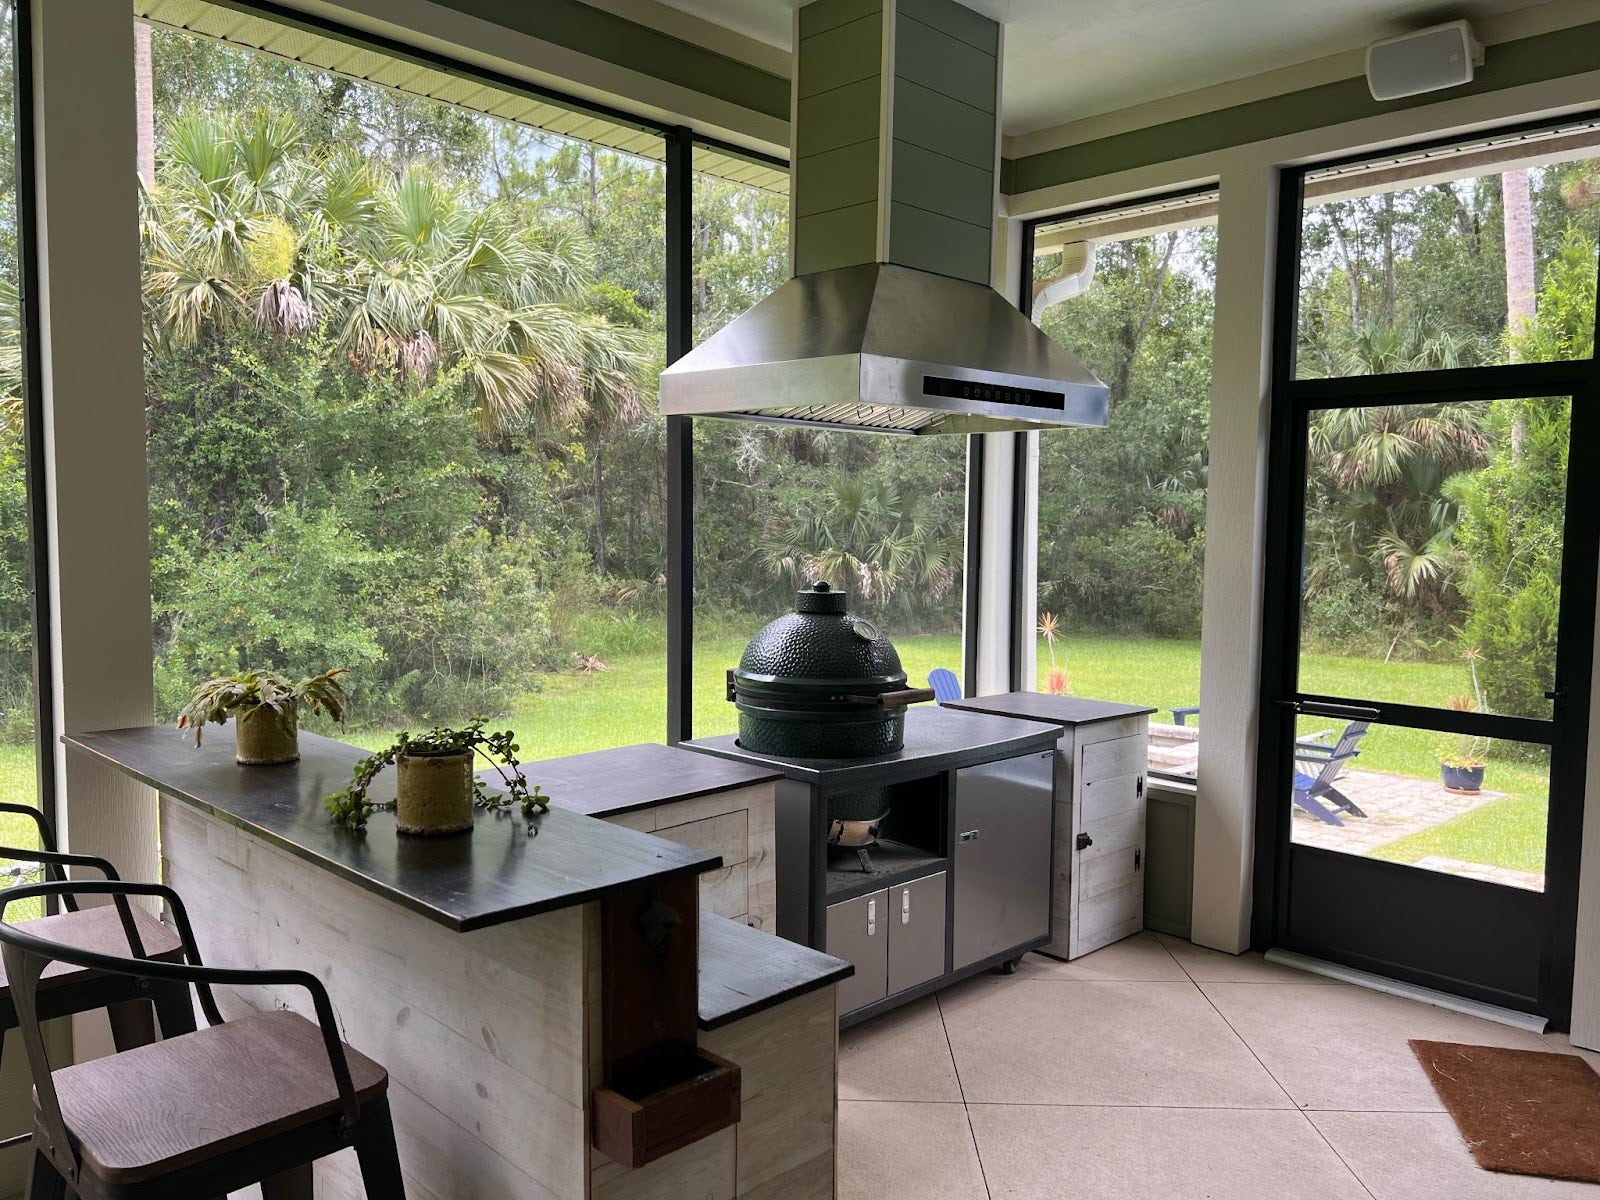 Spacious outdoor patio kitchen with a ceramic smoker grill and rustic wooden cabinetry set against a backdrop of lush greenery and a wooden playset. proline range hoo in an outdoor setting